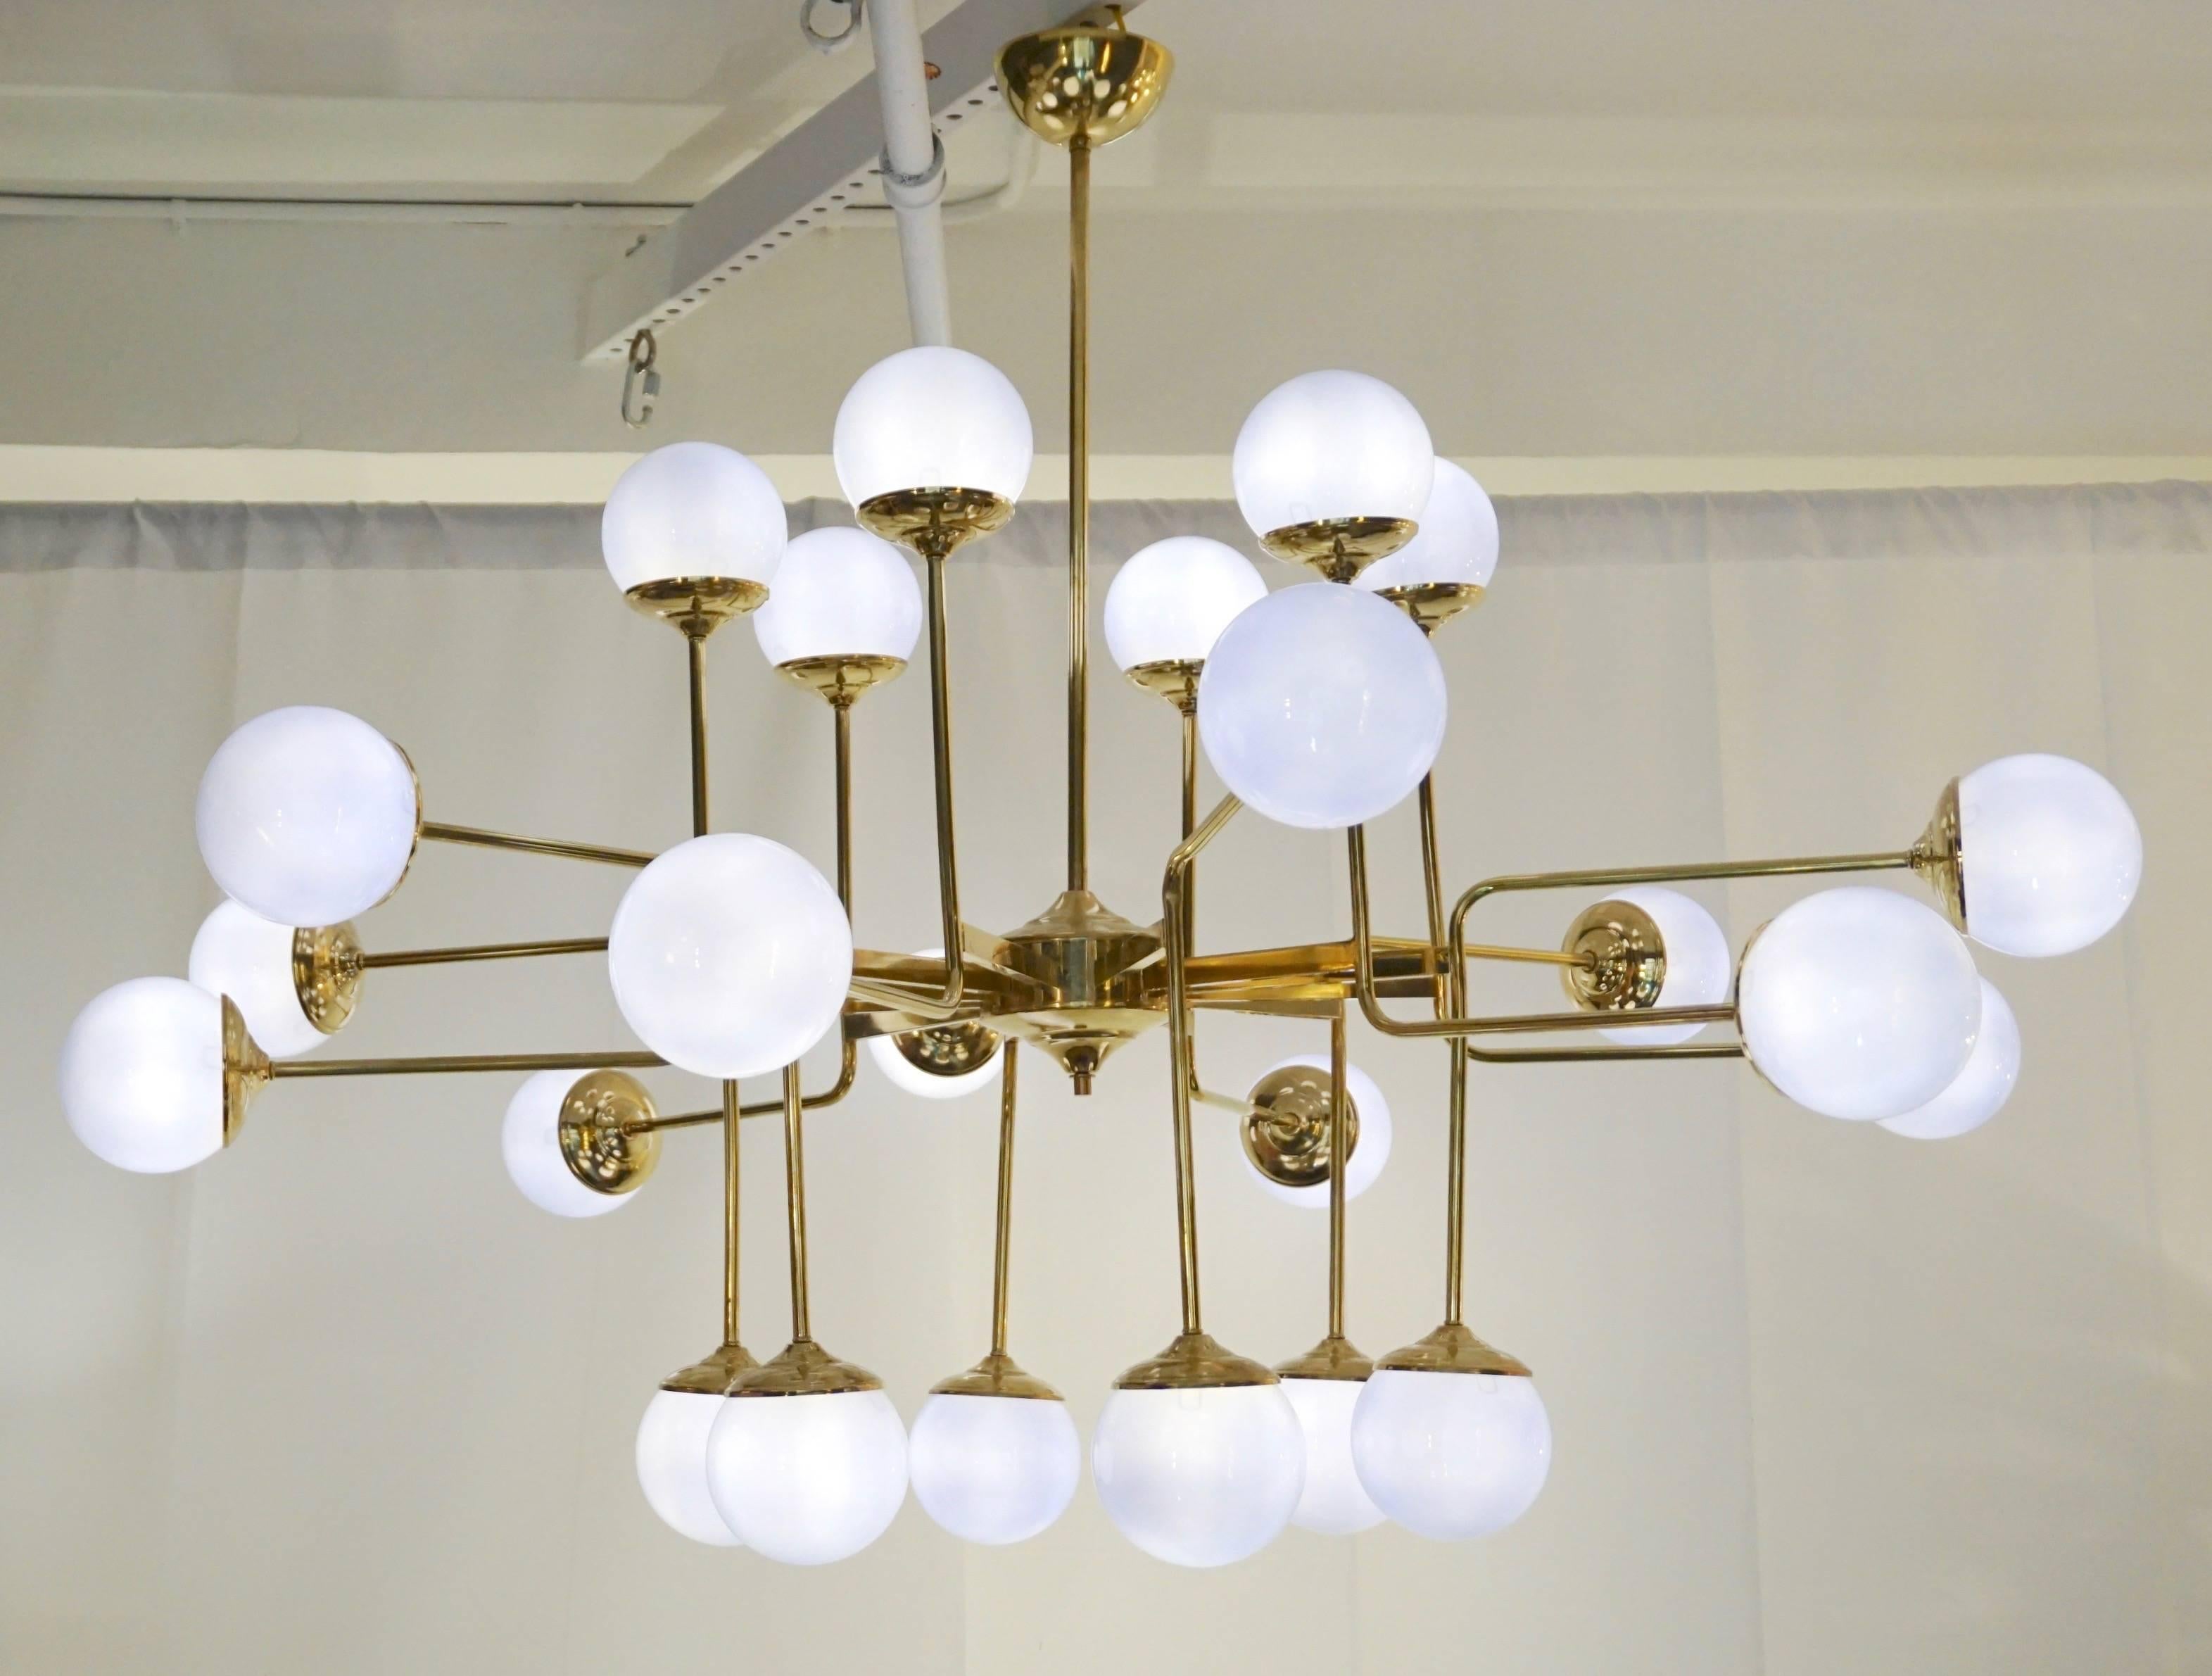 Italian Modern 24-Light Brass and Lavender Periwinkle Murano Glass Chandelier For Sale 1